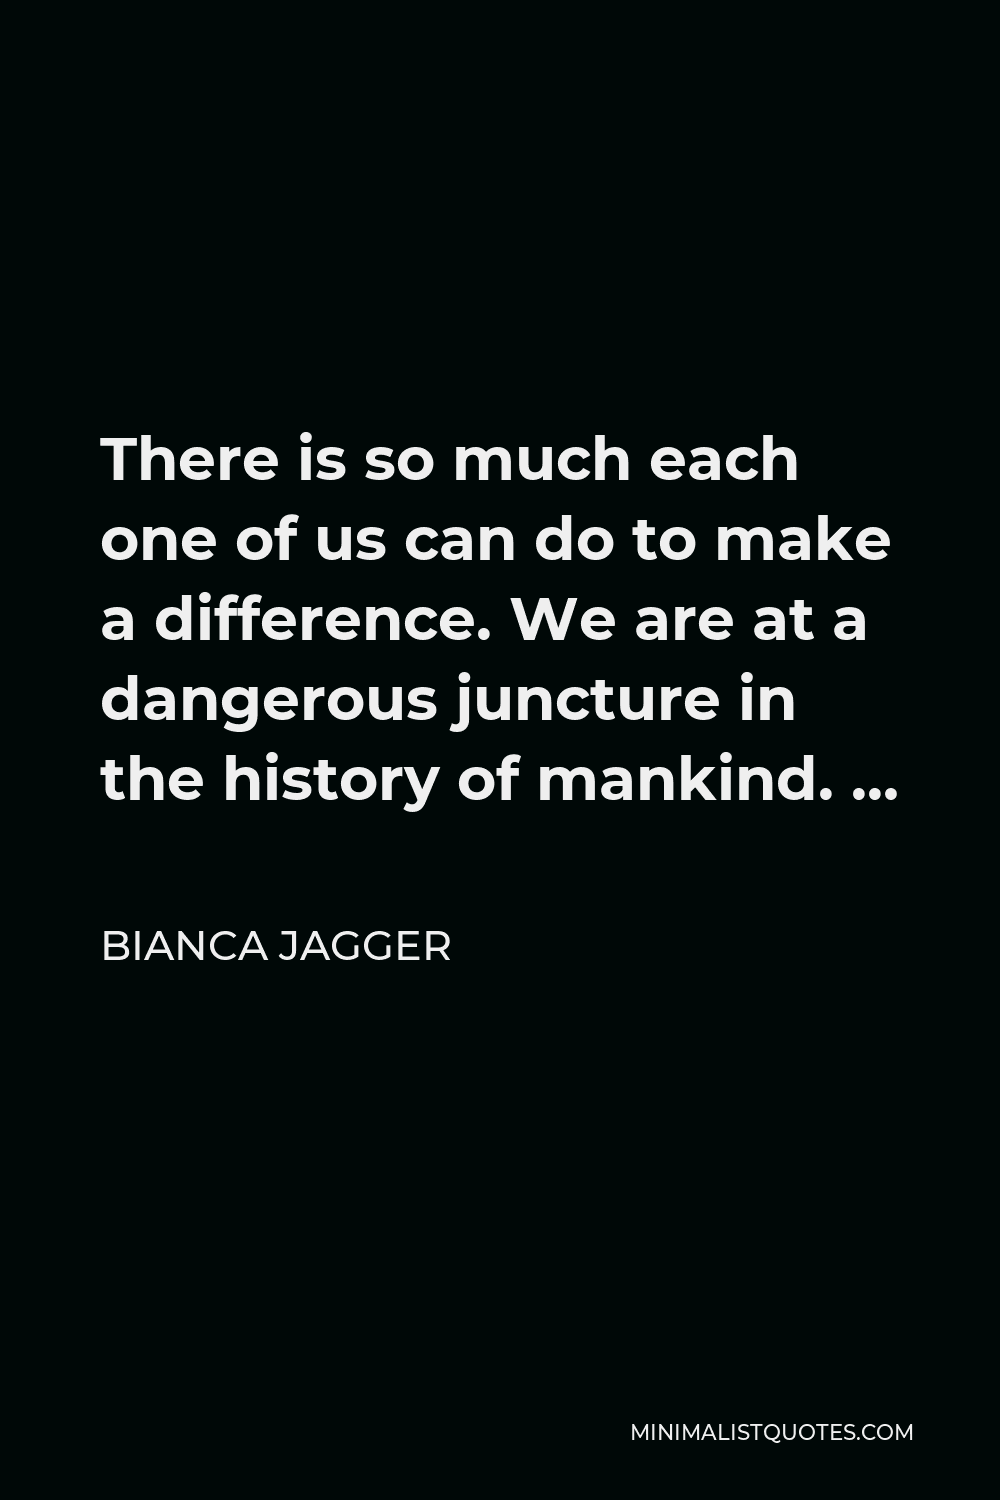 Bianca Jagger Quote - There is so much each one of us can do to make a difference. We are at a dangerous juncture in the history of mankind. …